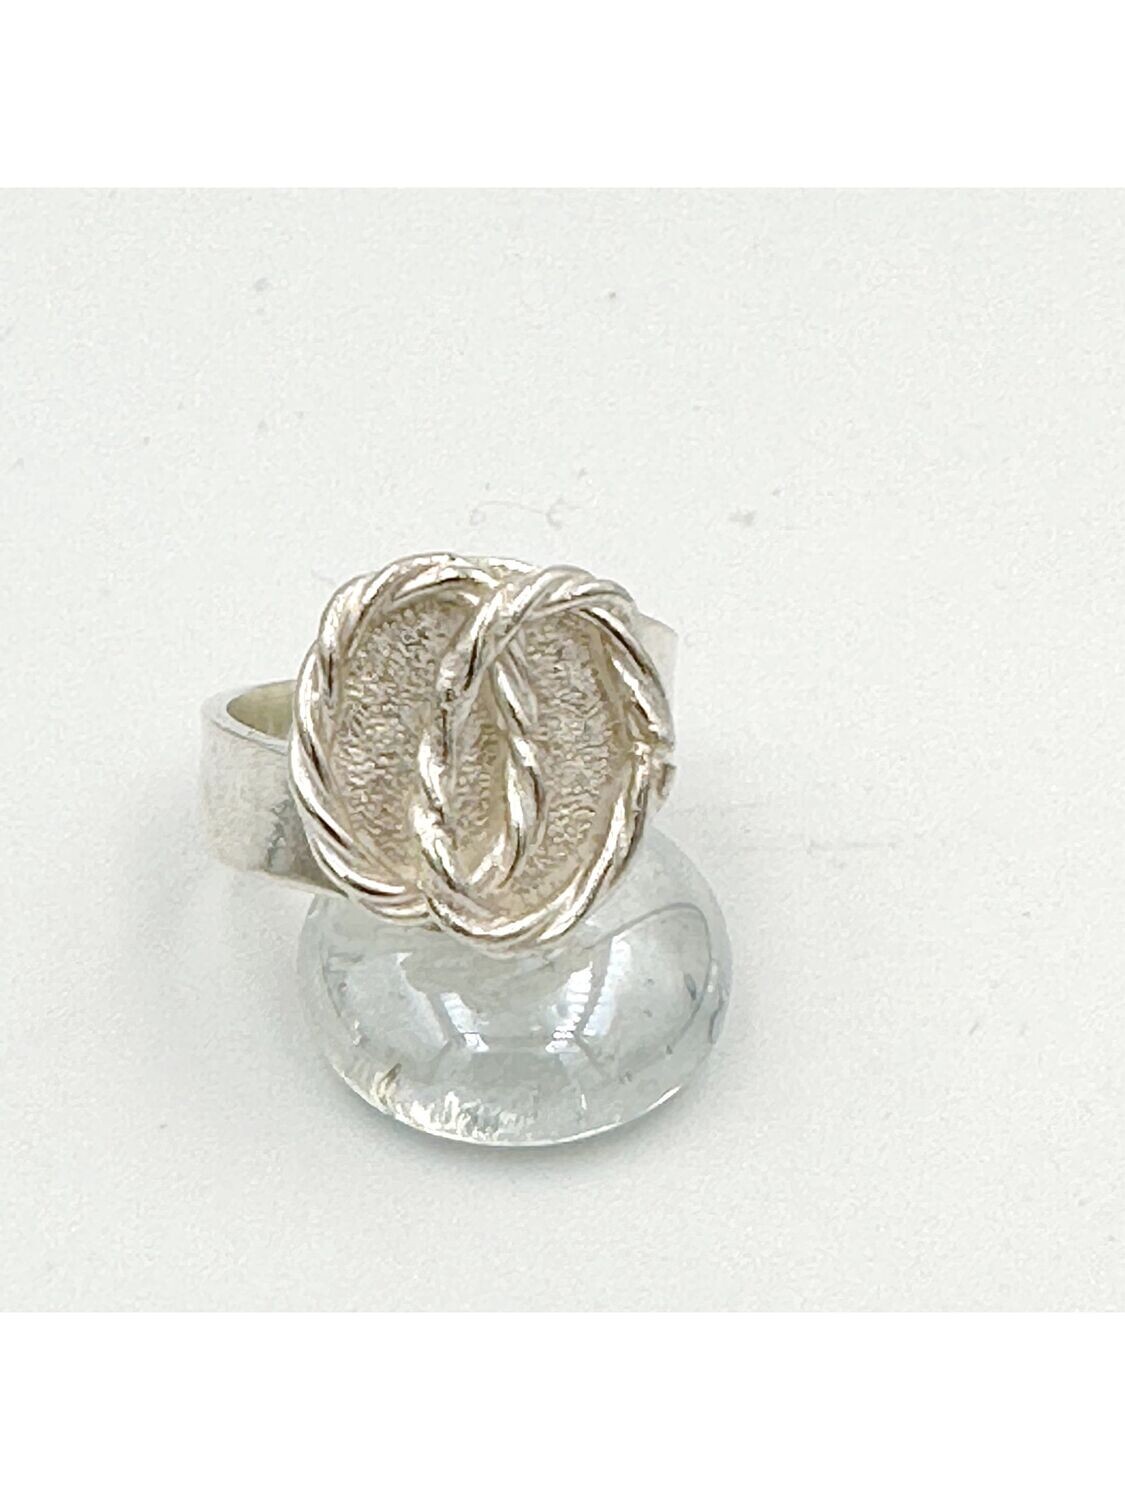 Crossover ring with twisted oval detail